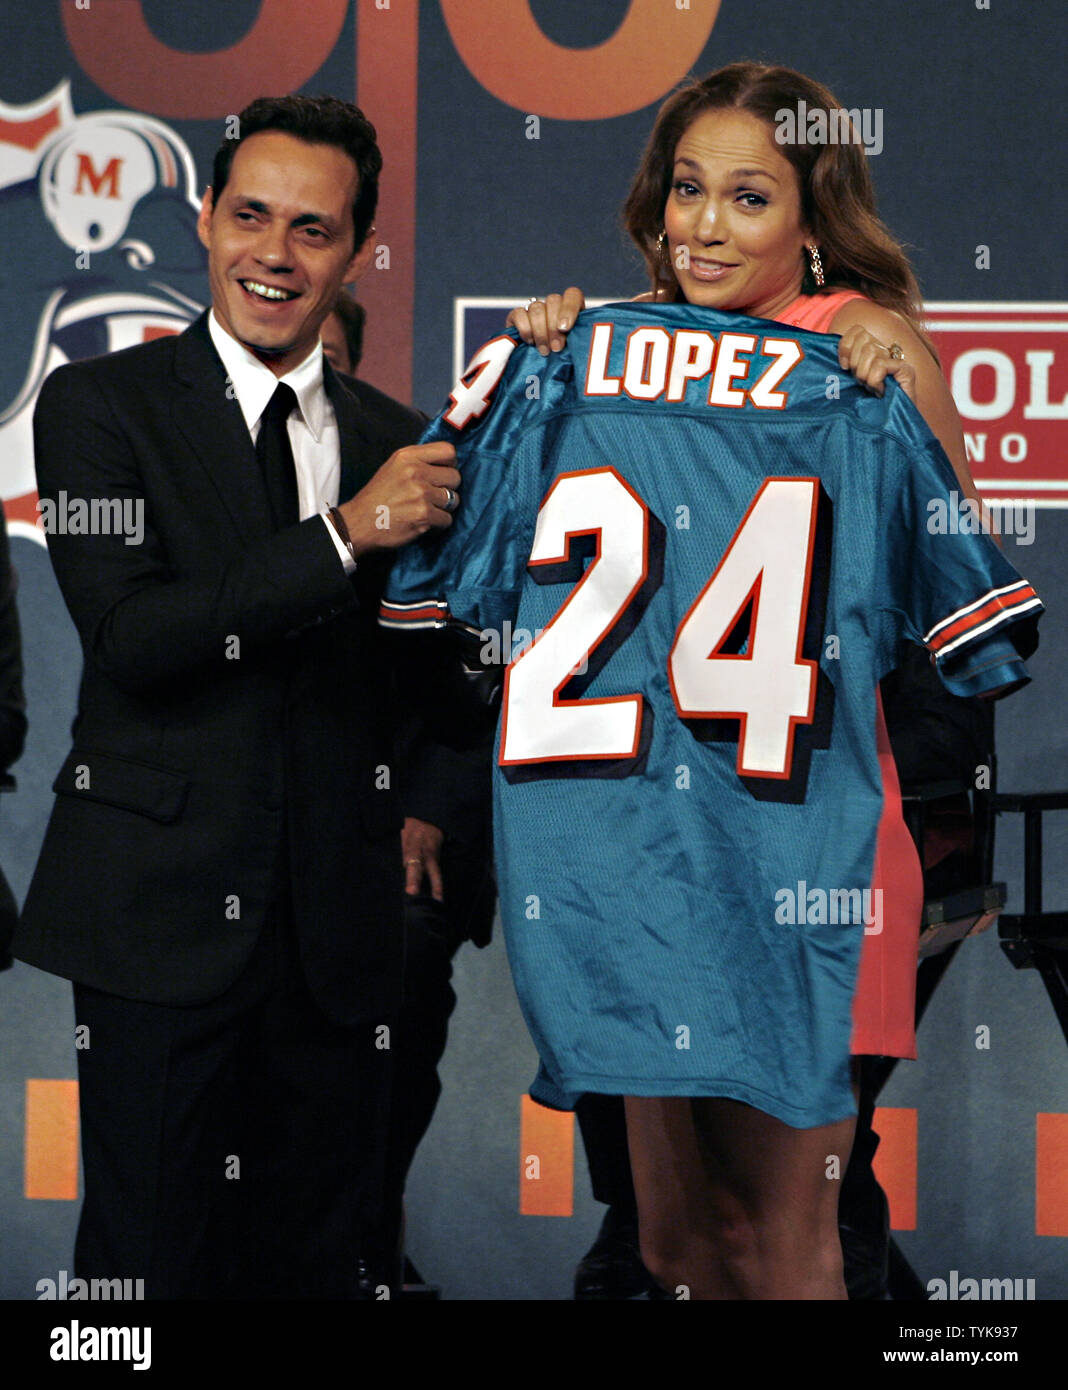 Jennifer Lopez and Marc Anthony hold up Miami Dolphins Jerseys on the stage  at the NFL, ESPN/ESPN Deportes and the Miami Dolphins press conference to  announce Marc Anthony as part owner of